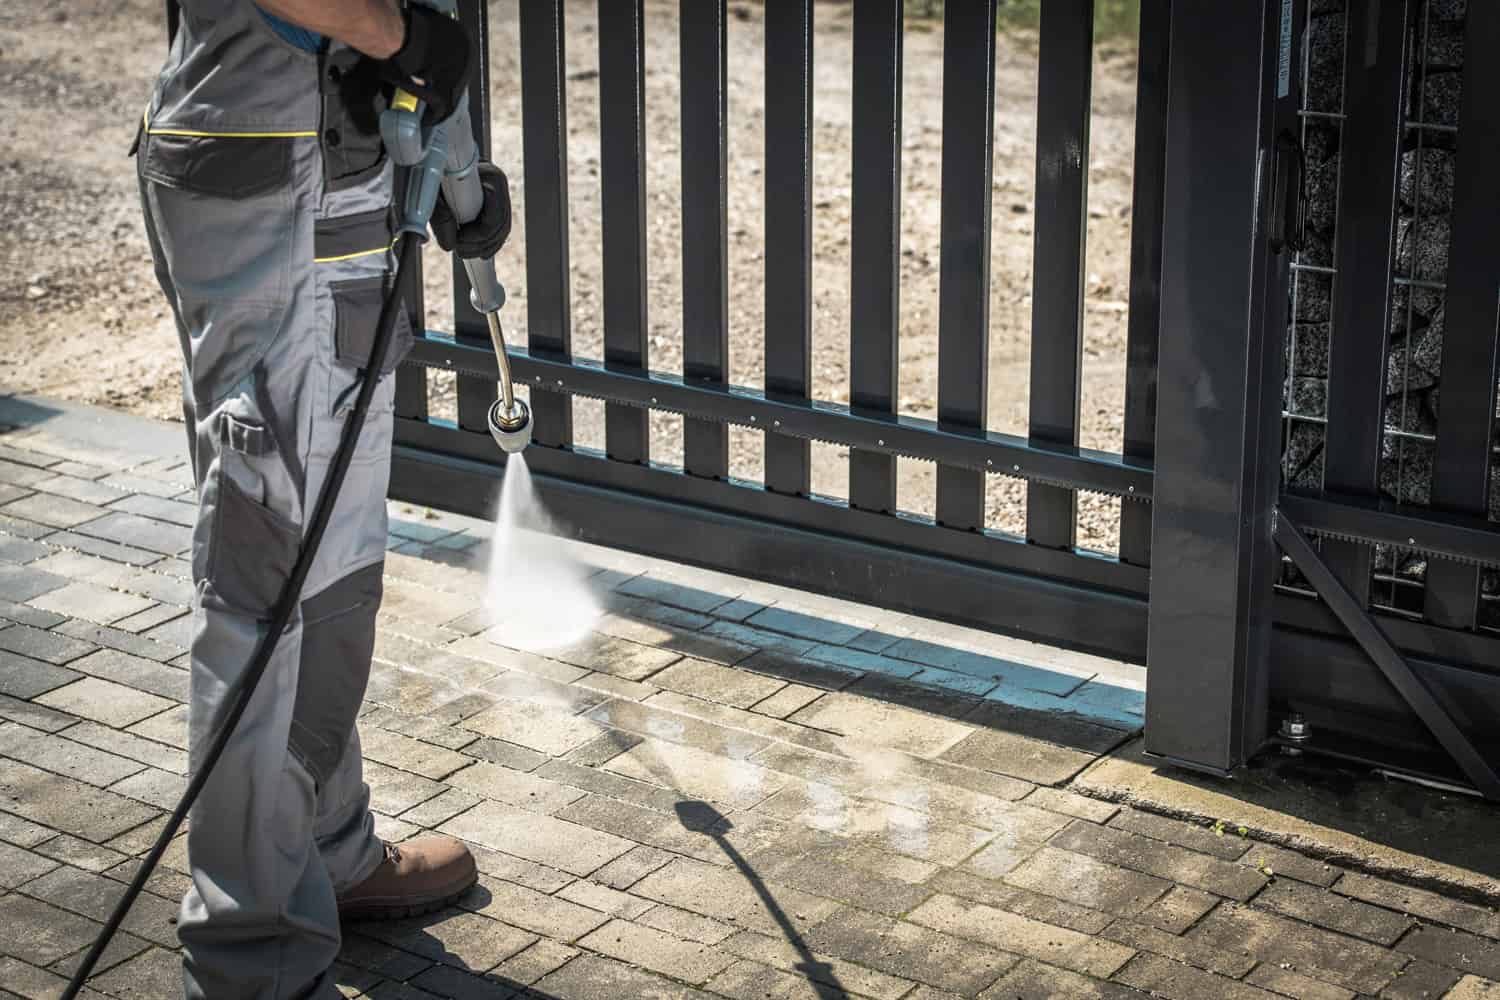 Driveway and a Gate Pressure Washing. Cleaning House Surroundings.